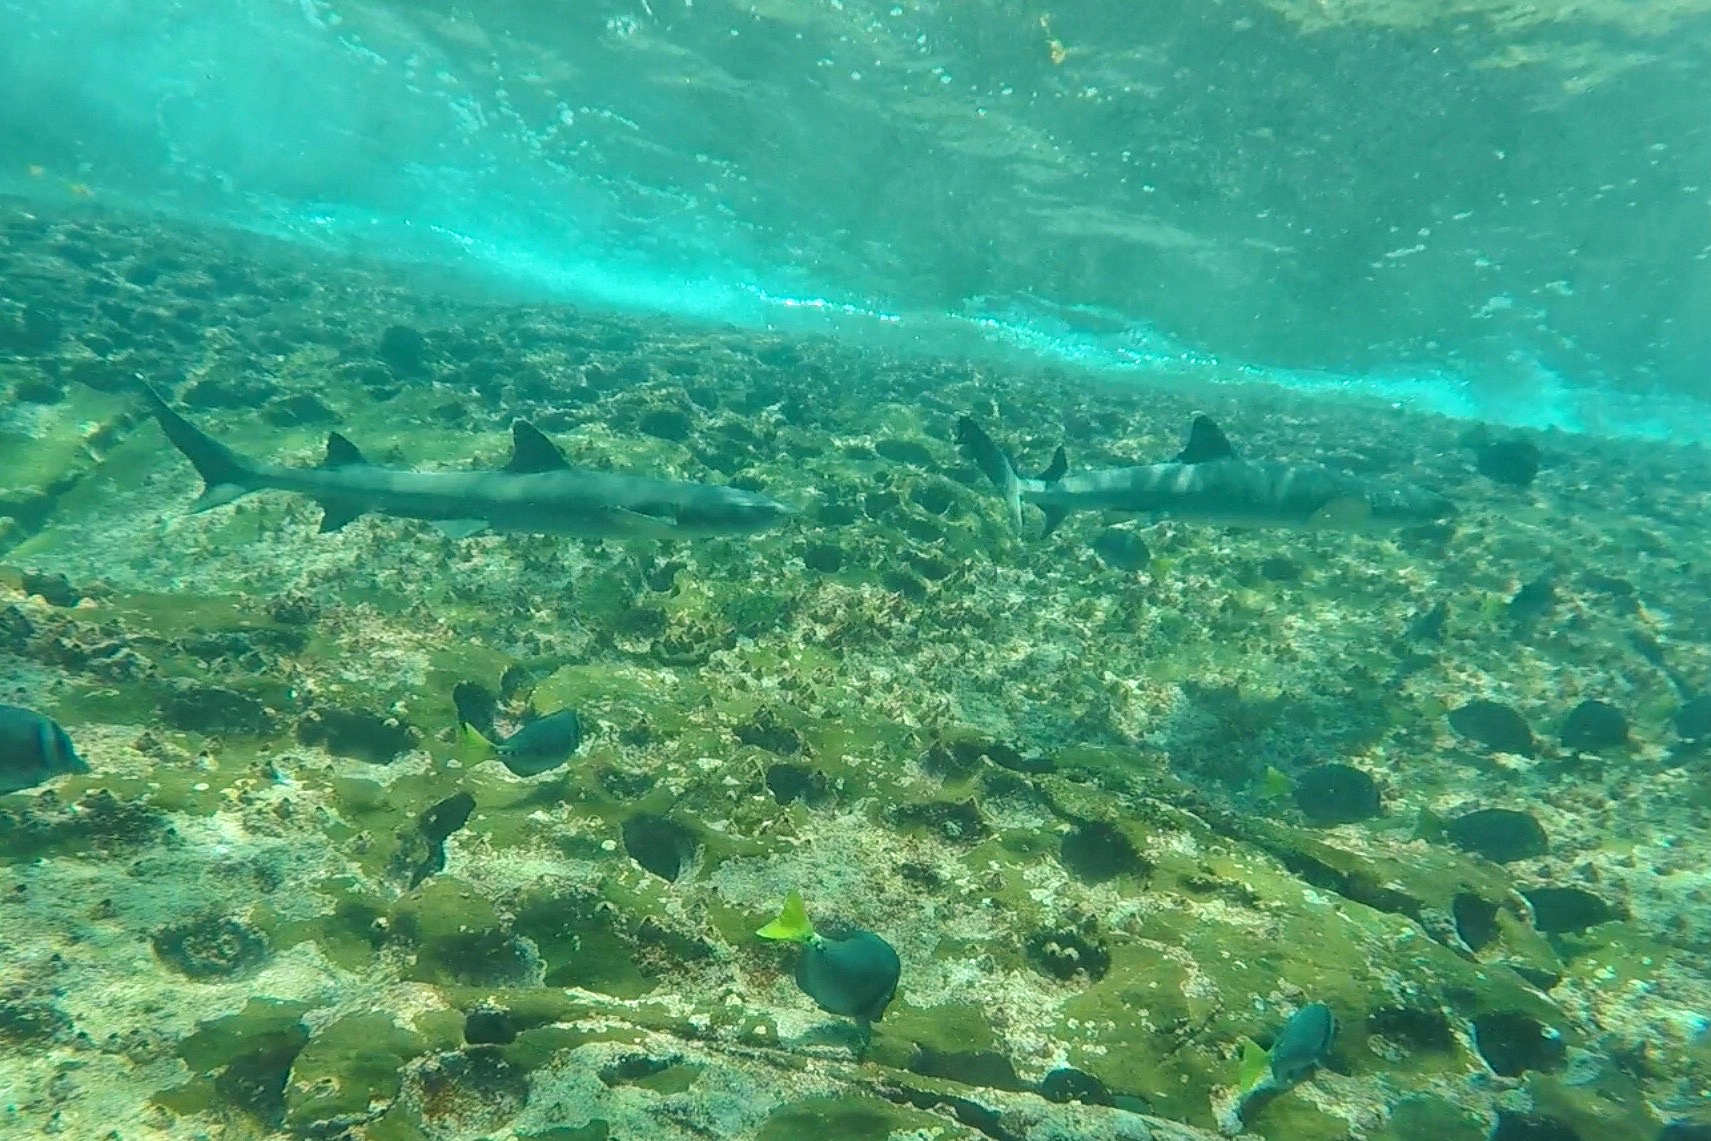 Sharks and fishes underwater in Galapagos, Ecuador. Swimming with sharks in the Galapagos